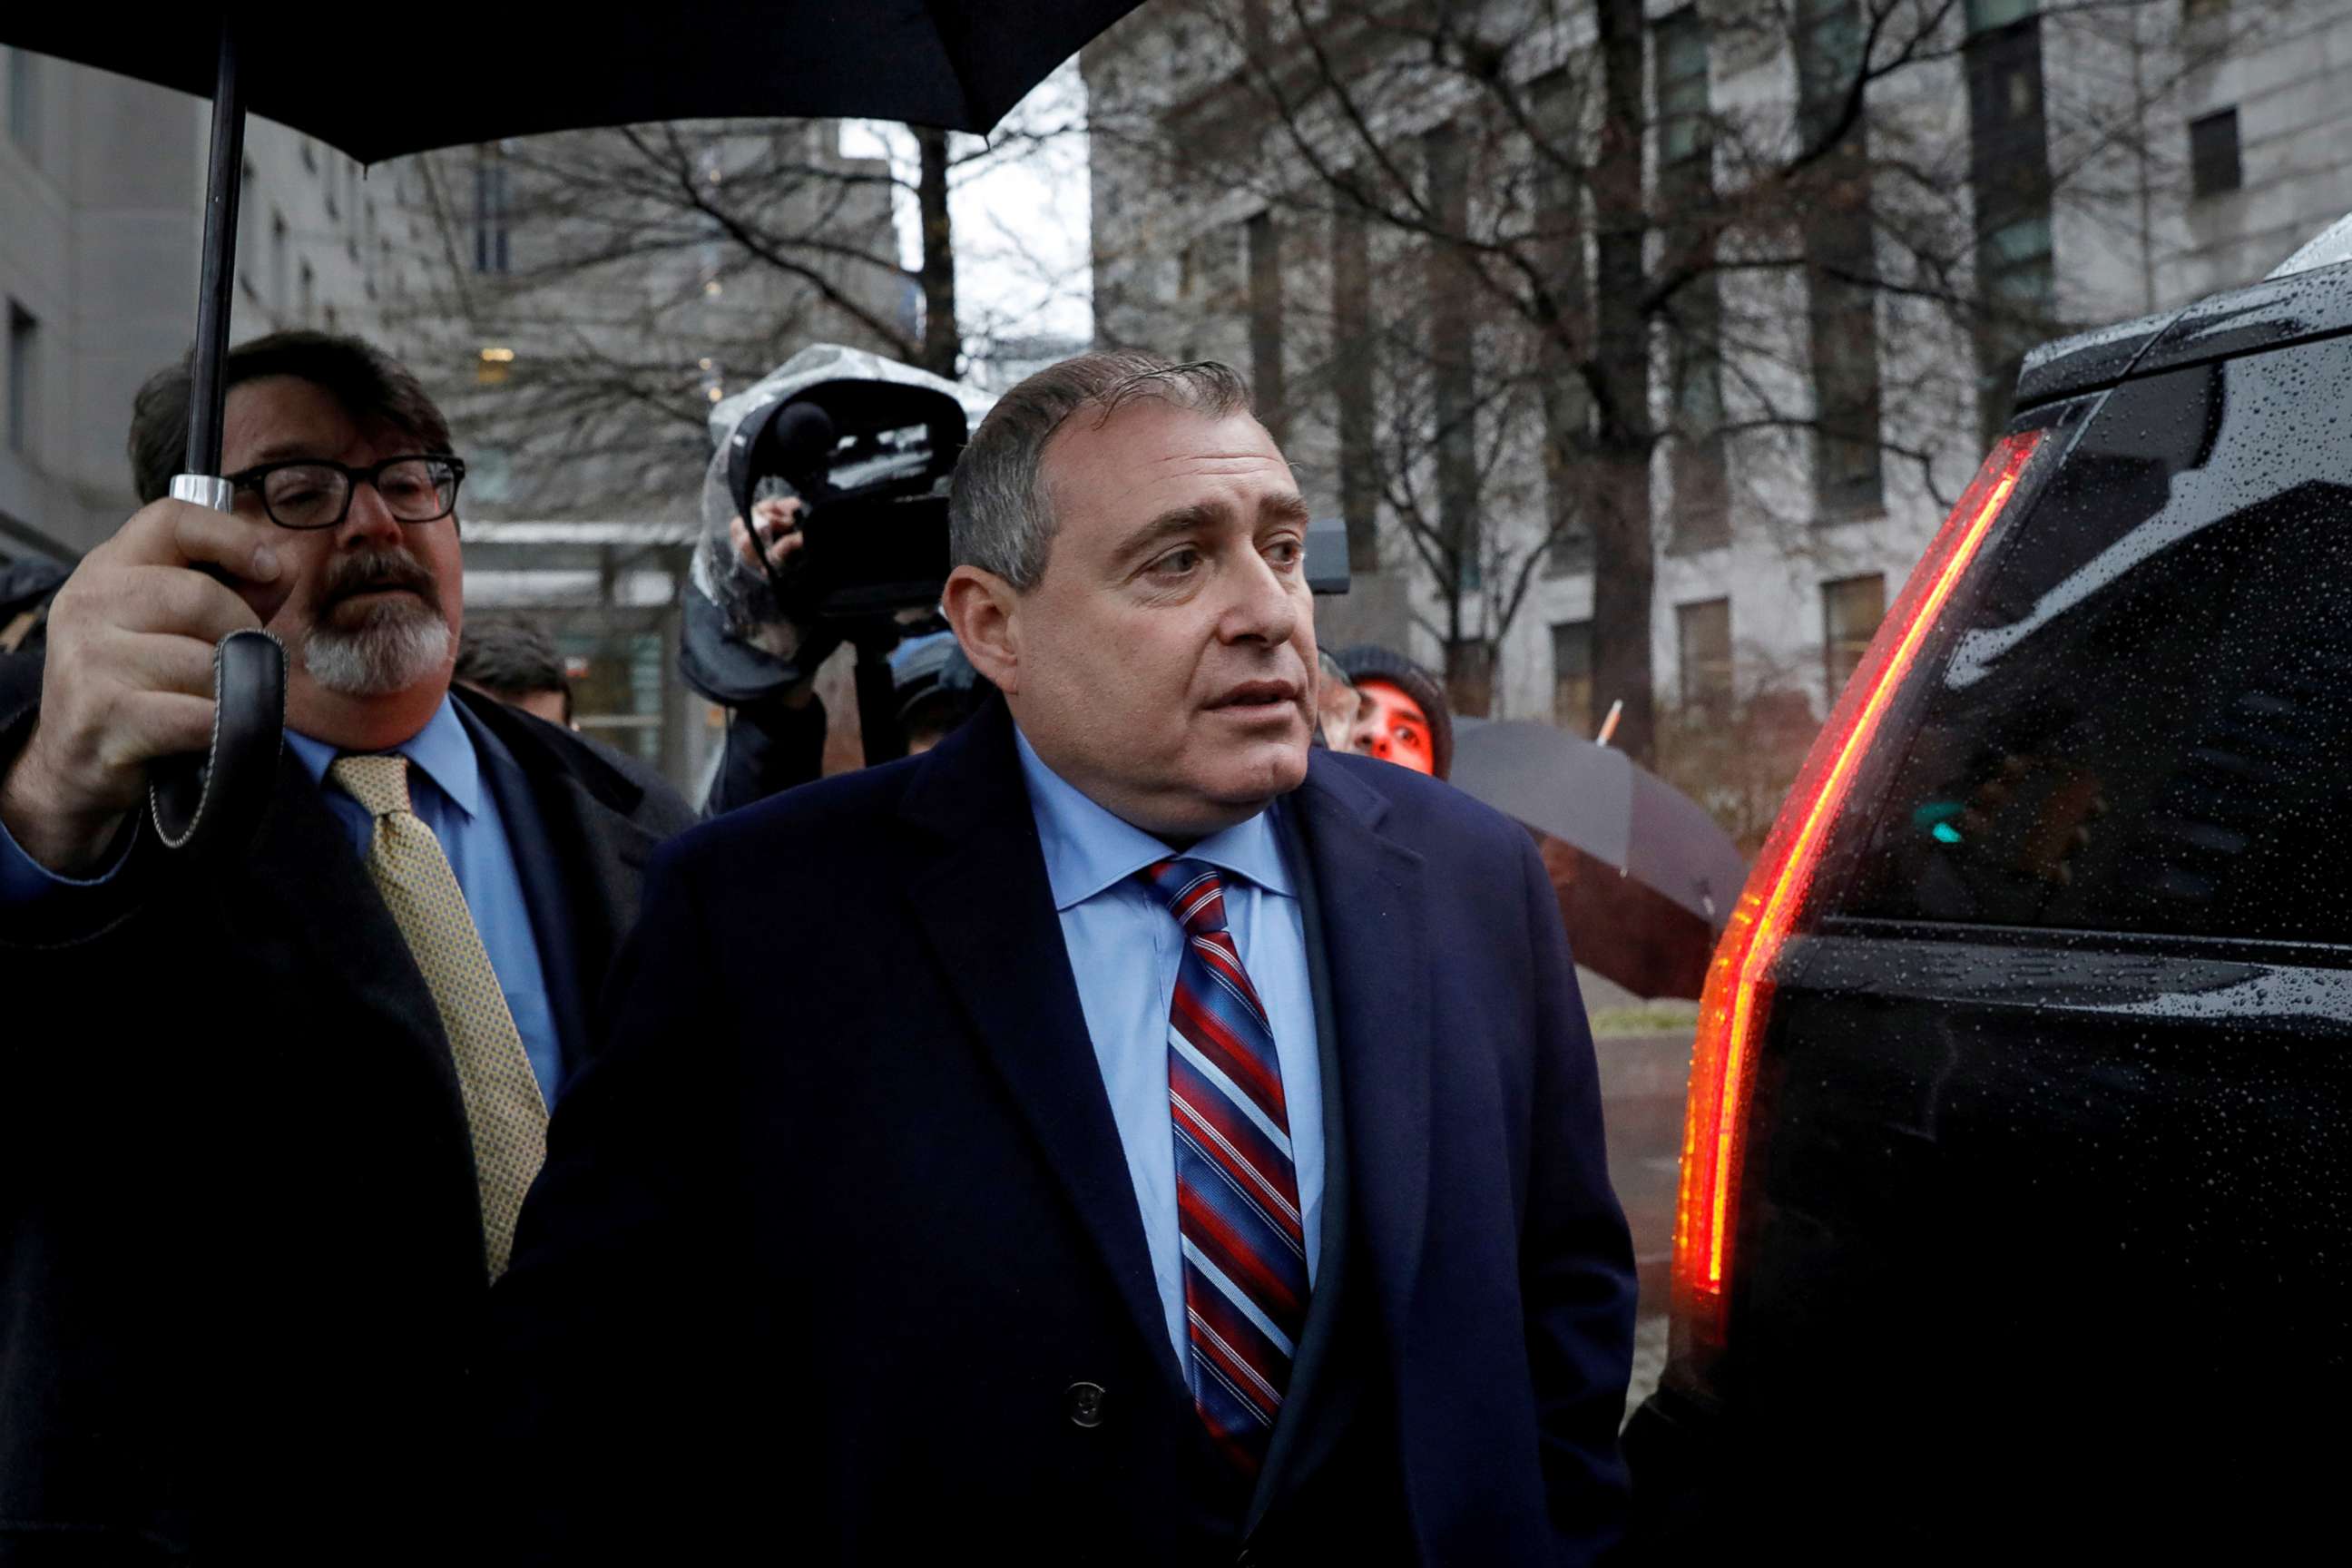 PHOTO: Ukrainian-American businessman Lev Parnas, an associate of President Donald Trump's personal lawyer Rudy Giuliani, exits after a bail hearing at the Manhattan Federal Court in New York, Dec. 17, 2019.